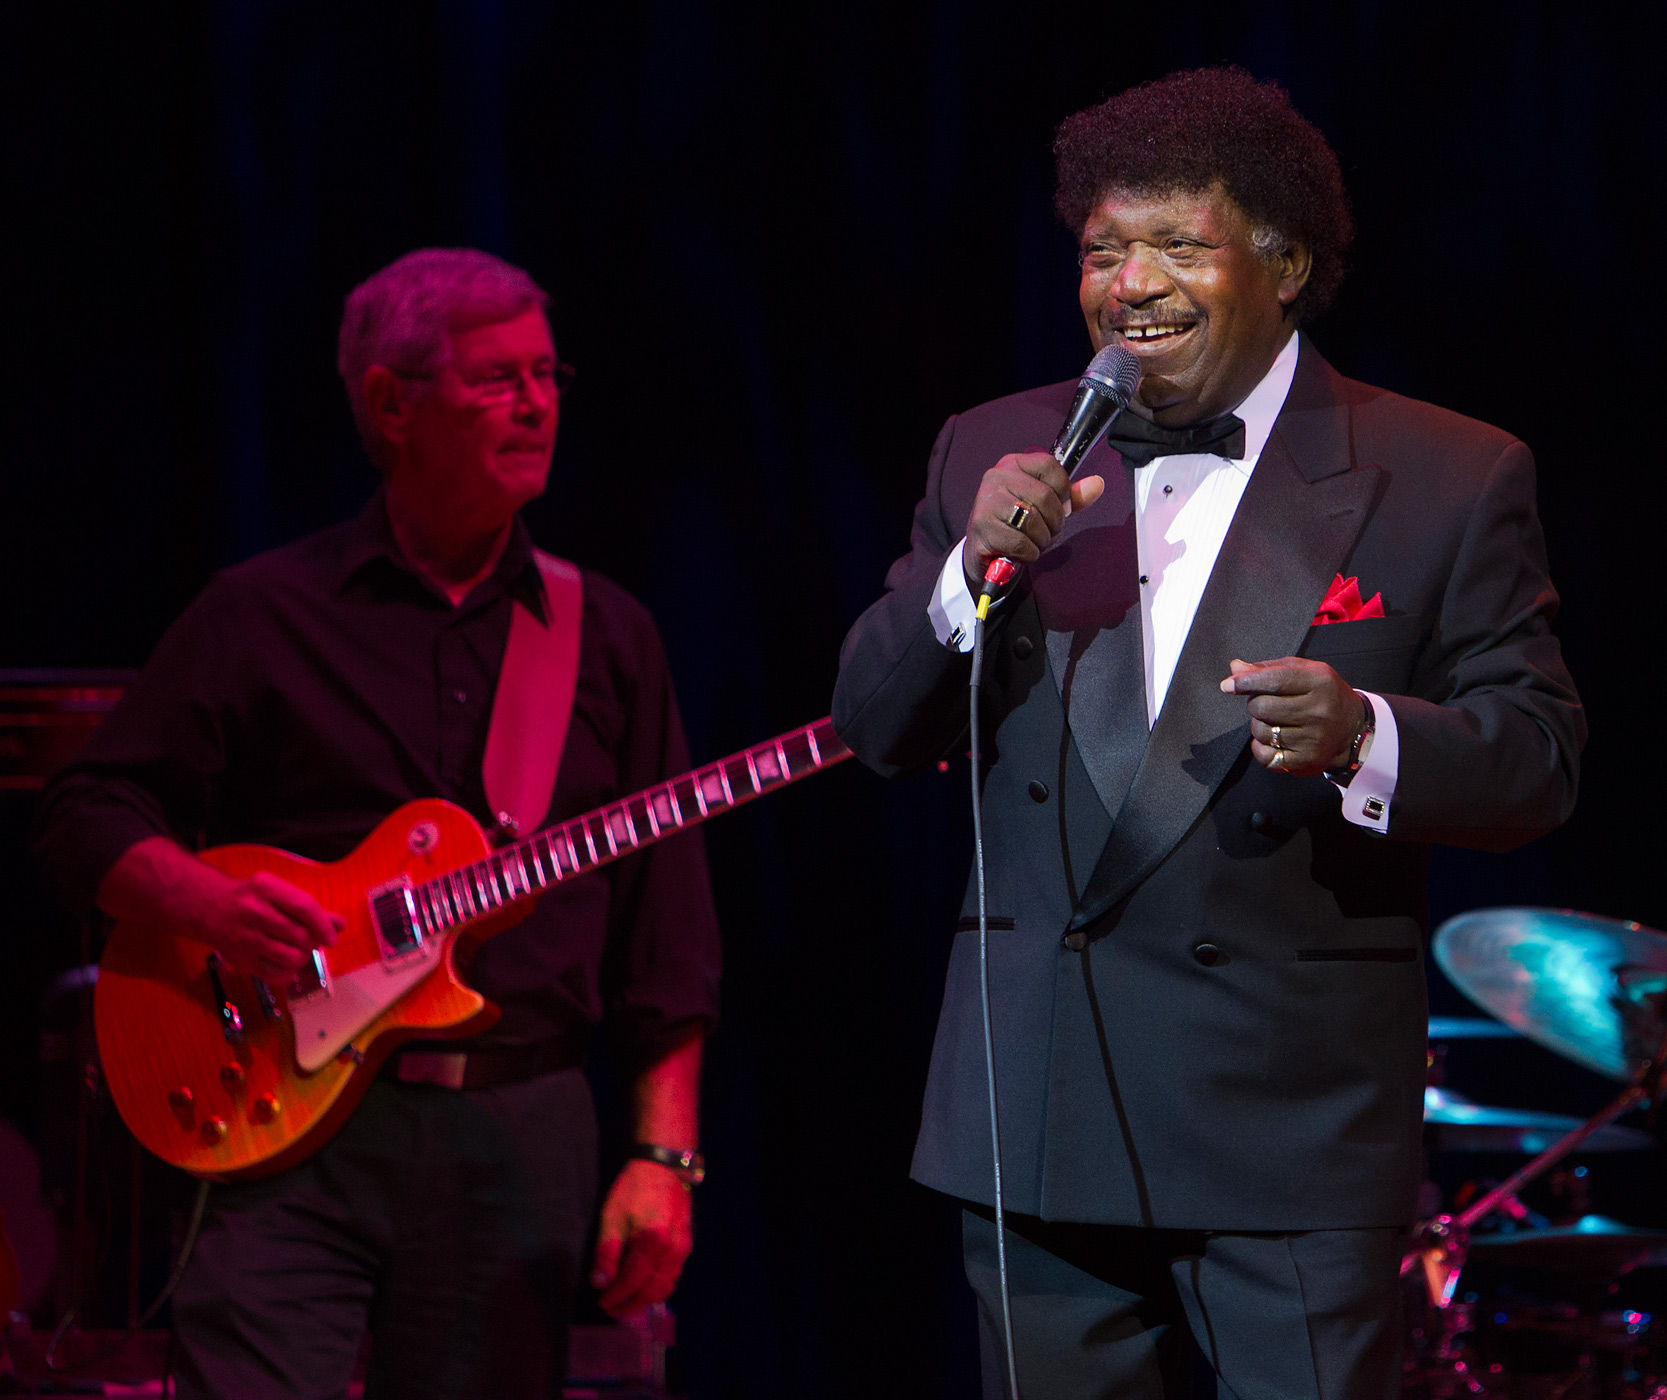 Percy Sledge performs during the 1st Annual Clay Walker Gala &amp; Live Performance To Benefit MS at the House Of Blues on October 18, 2012 in Houston, TX. (Bob Levey—WireImage/Getty Images)